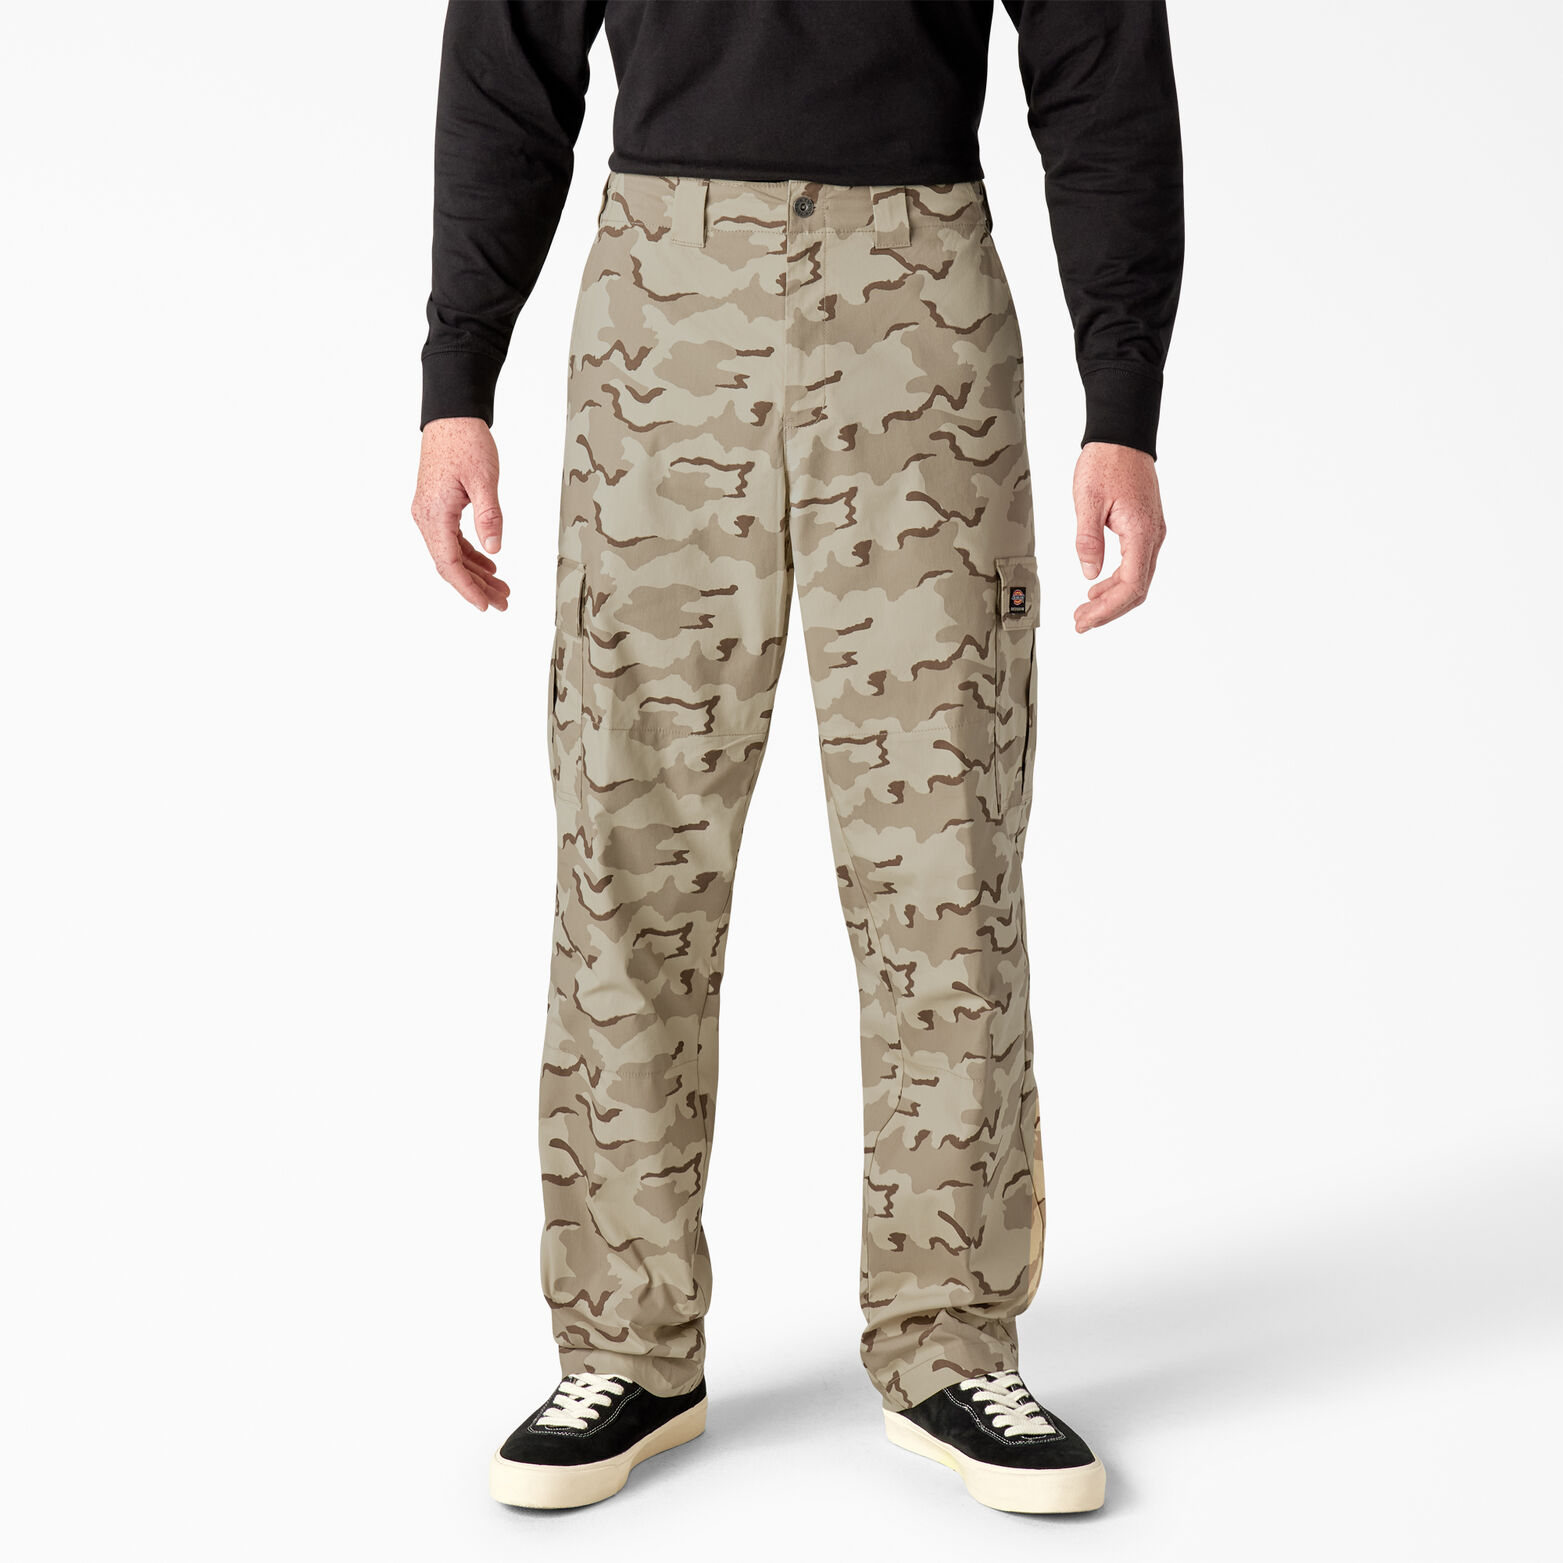 Total pattern military wide cargo pants